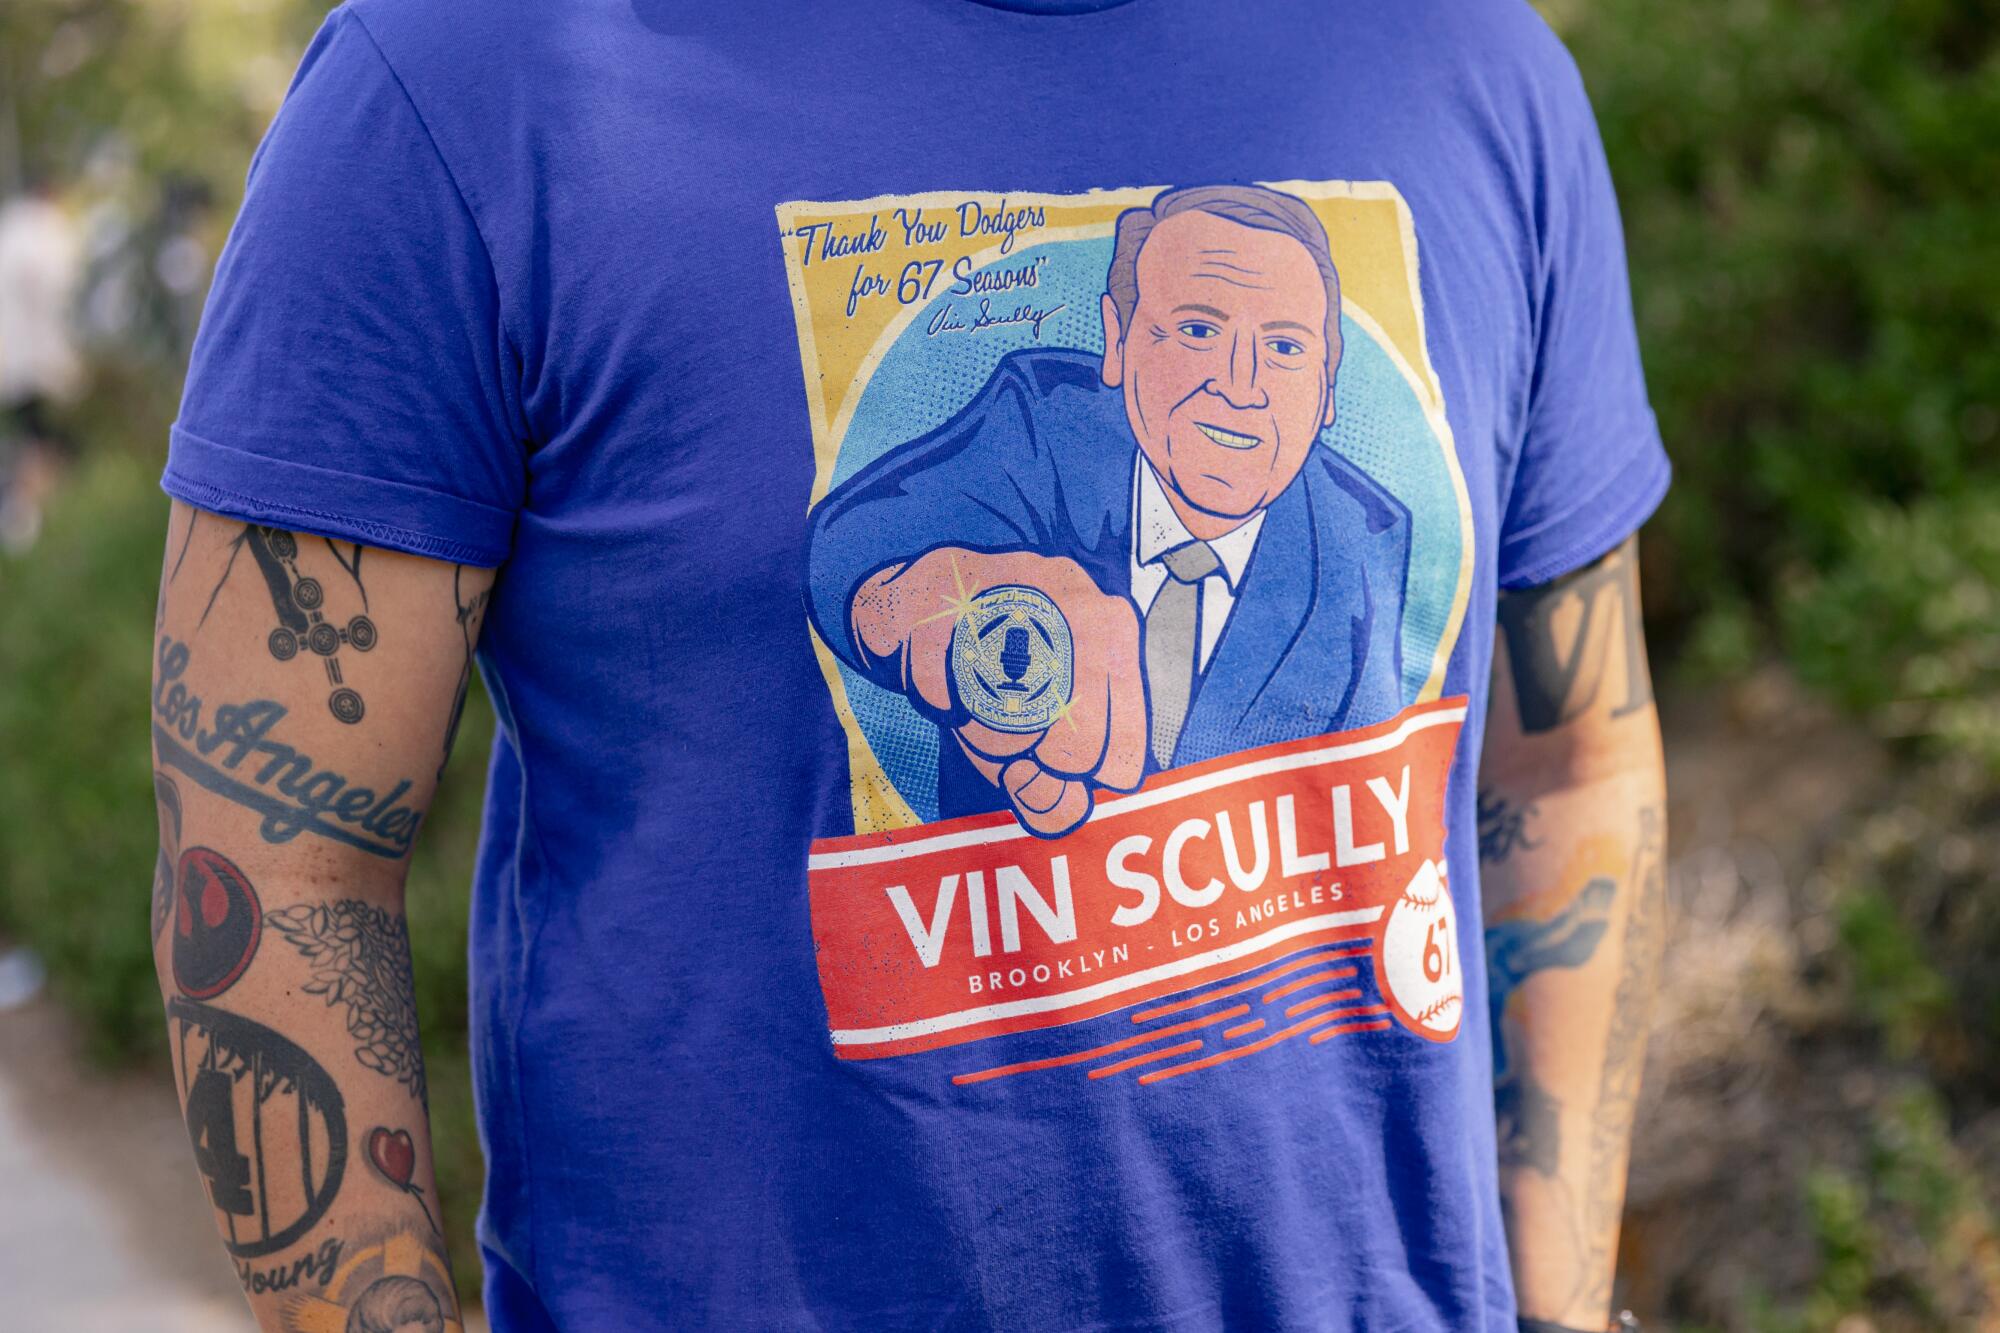 Alain Gomez stands for a portrait in his Vin Scully shirt.